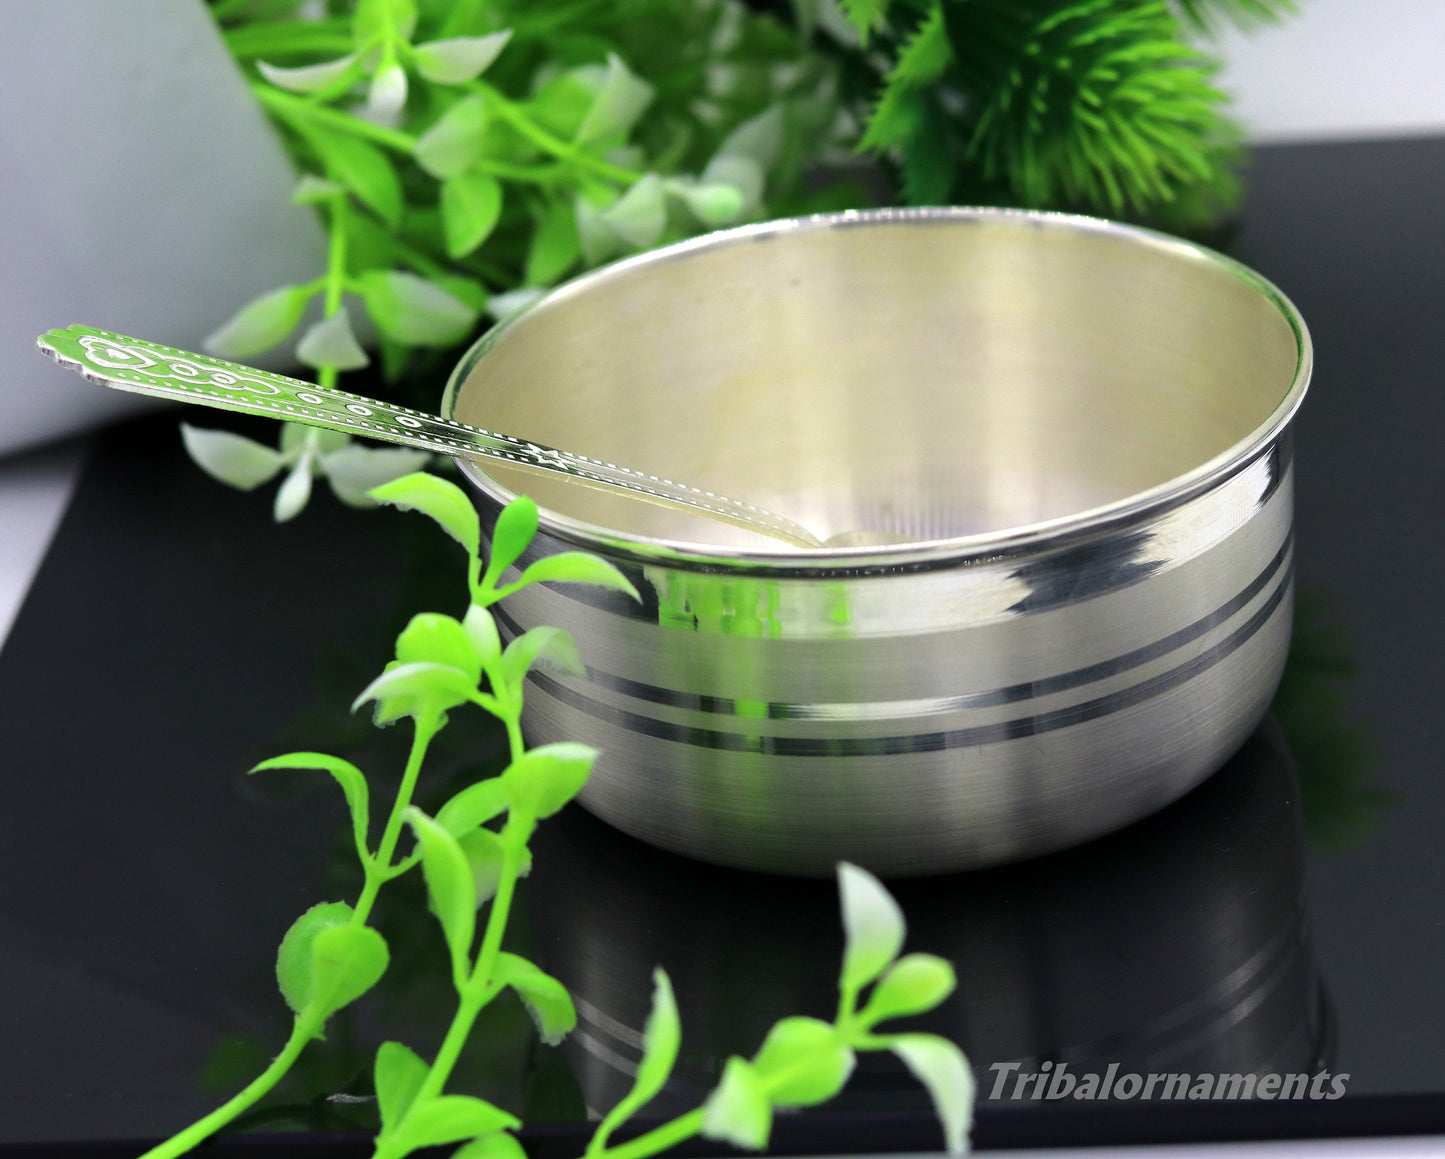 999 pure sterling silver handmade solid silver bowl and spoon, silver has antibacterial properties, keep stay healthy, silver vessels sv22 - TRIBAL ORNAMENTS